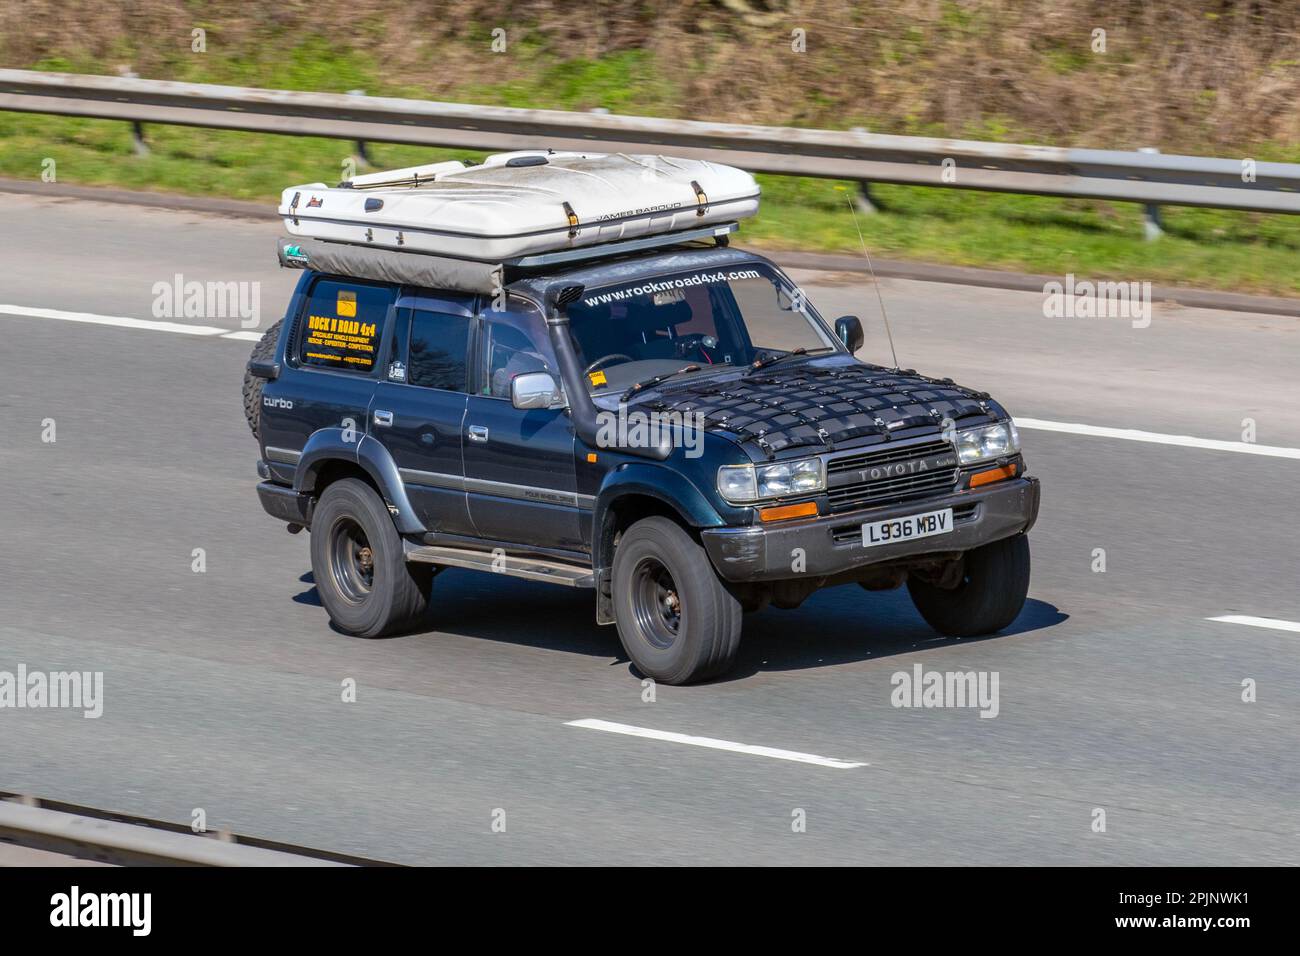 1993 90s nineties TOYOTA LAND CRUISER Rock N Road four wheel drive 4x4 Turbo, Specialist Vehicle Group , rescue, expedition Competition equipment Stock Photo